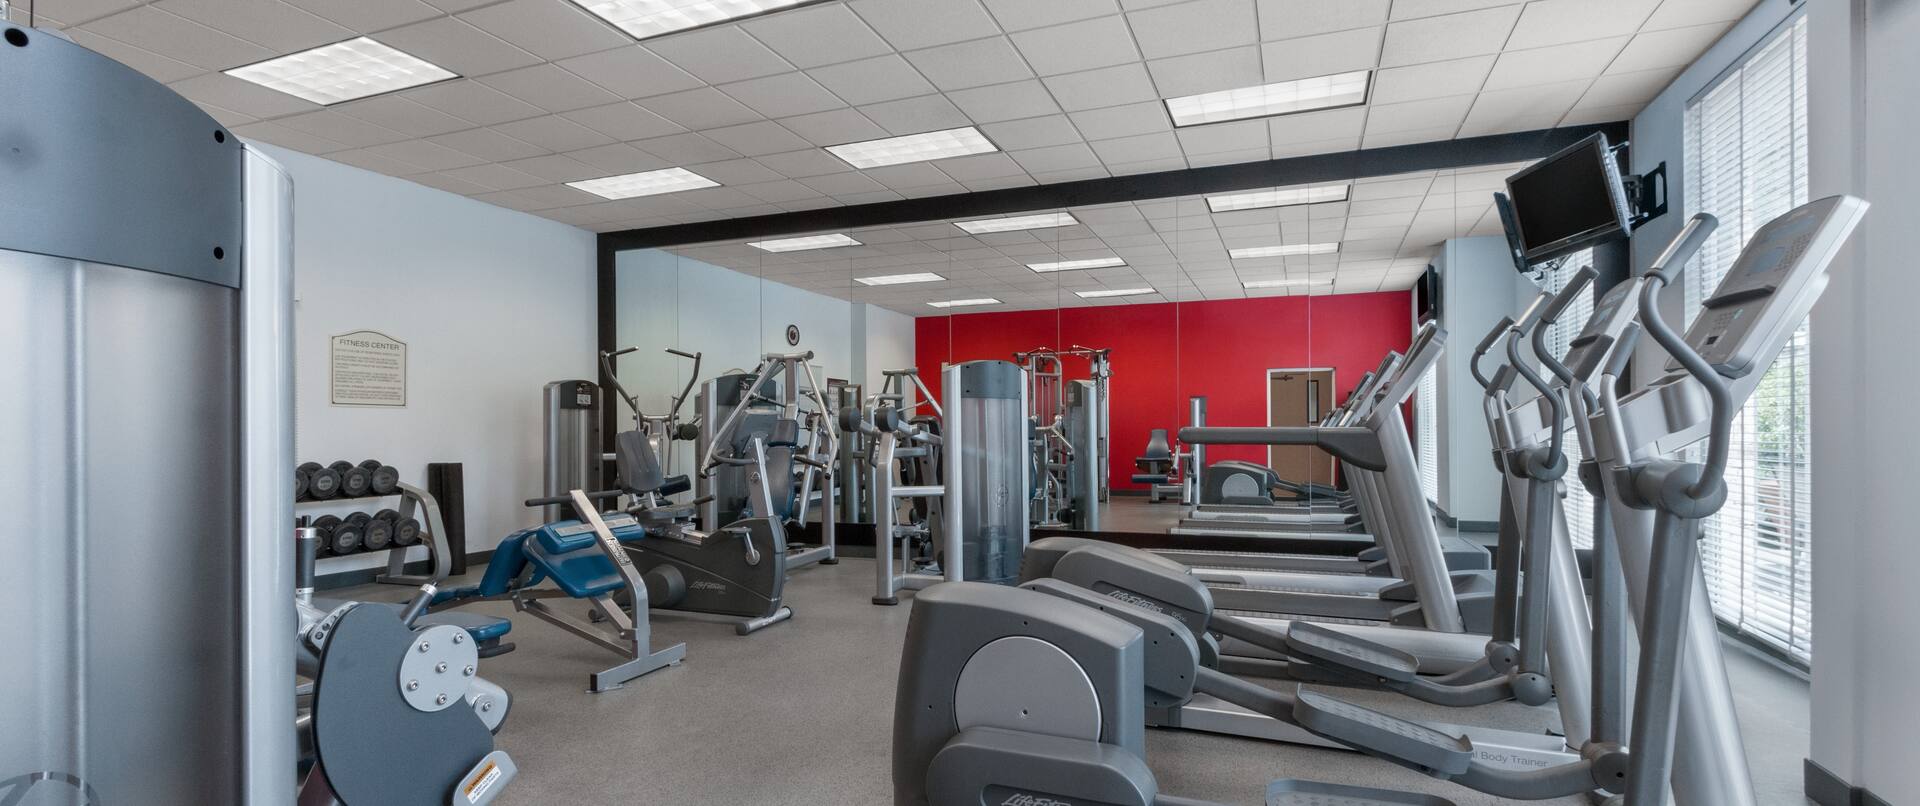 Fitness Center with ellipticals and other equipment.